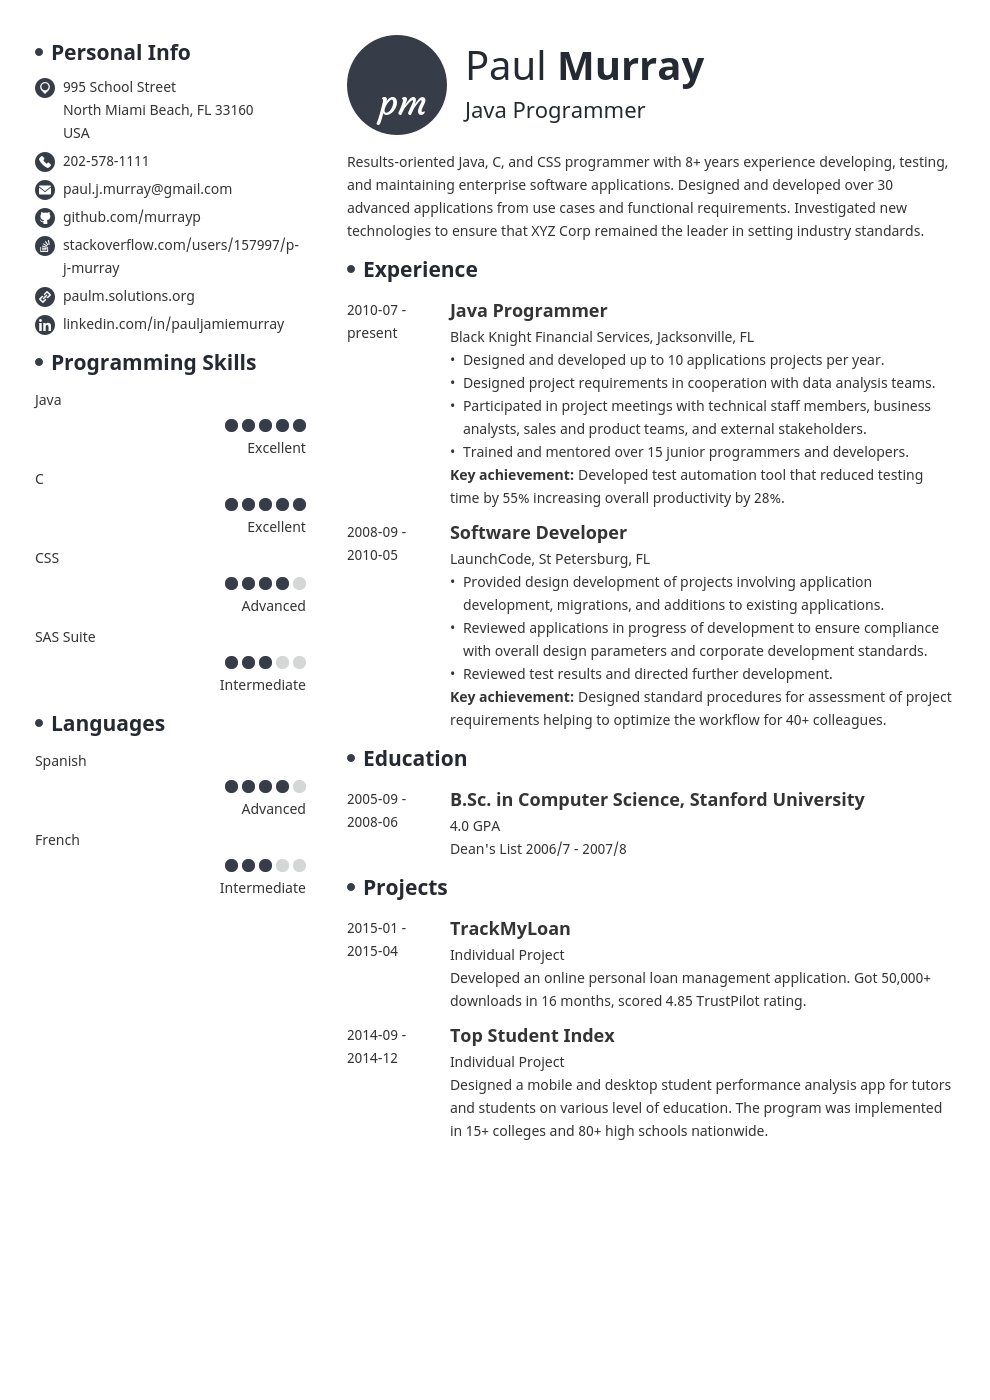 9 Great Programming Projects for a Resume (Examples)